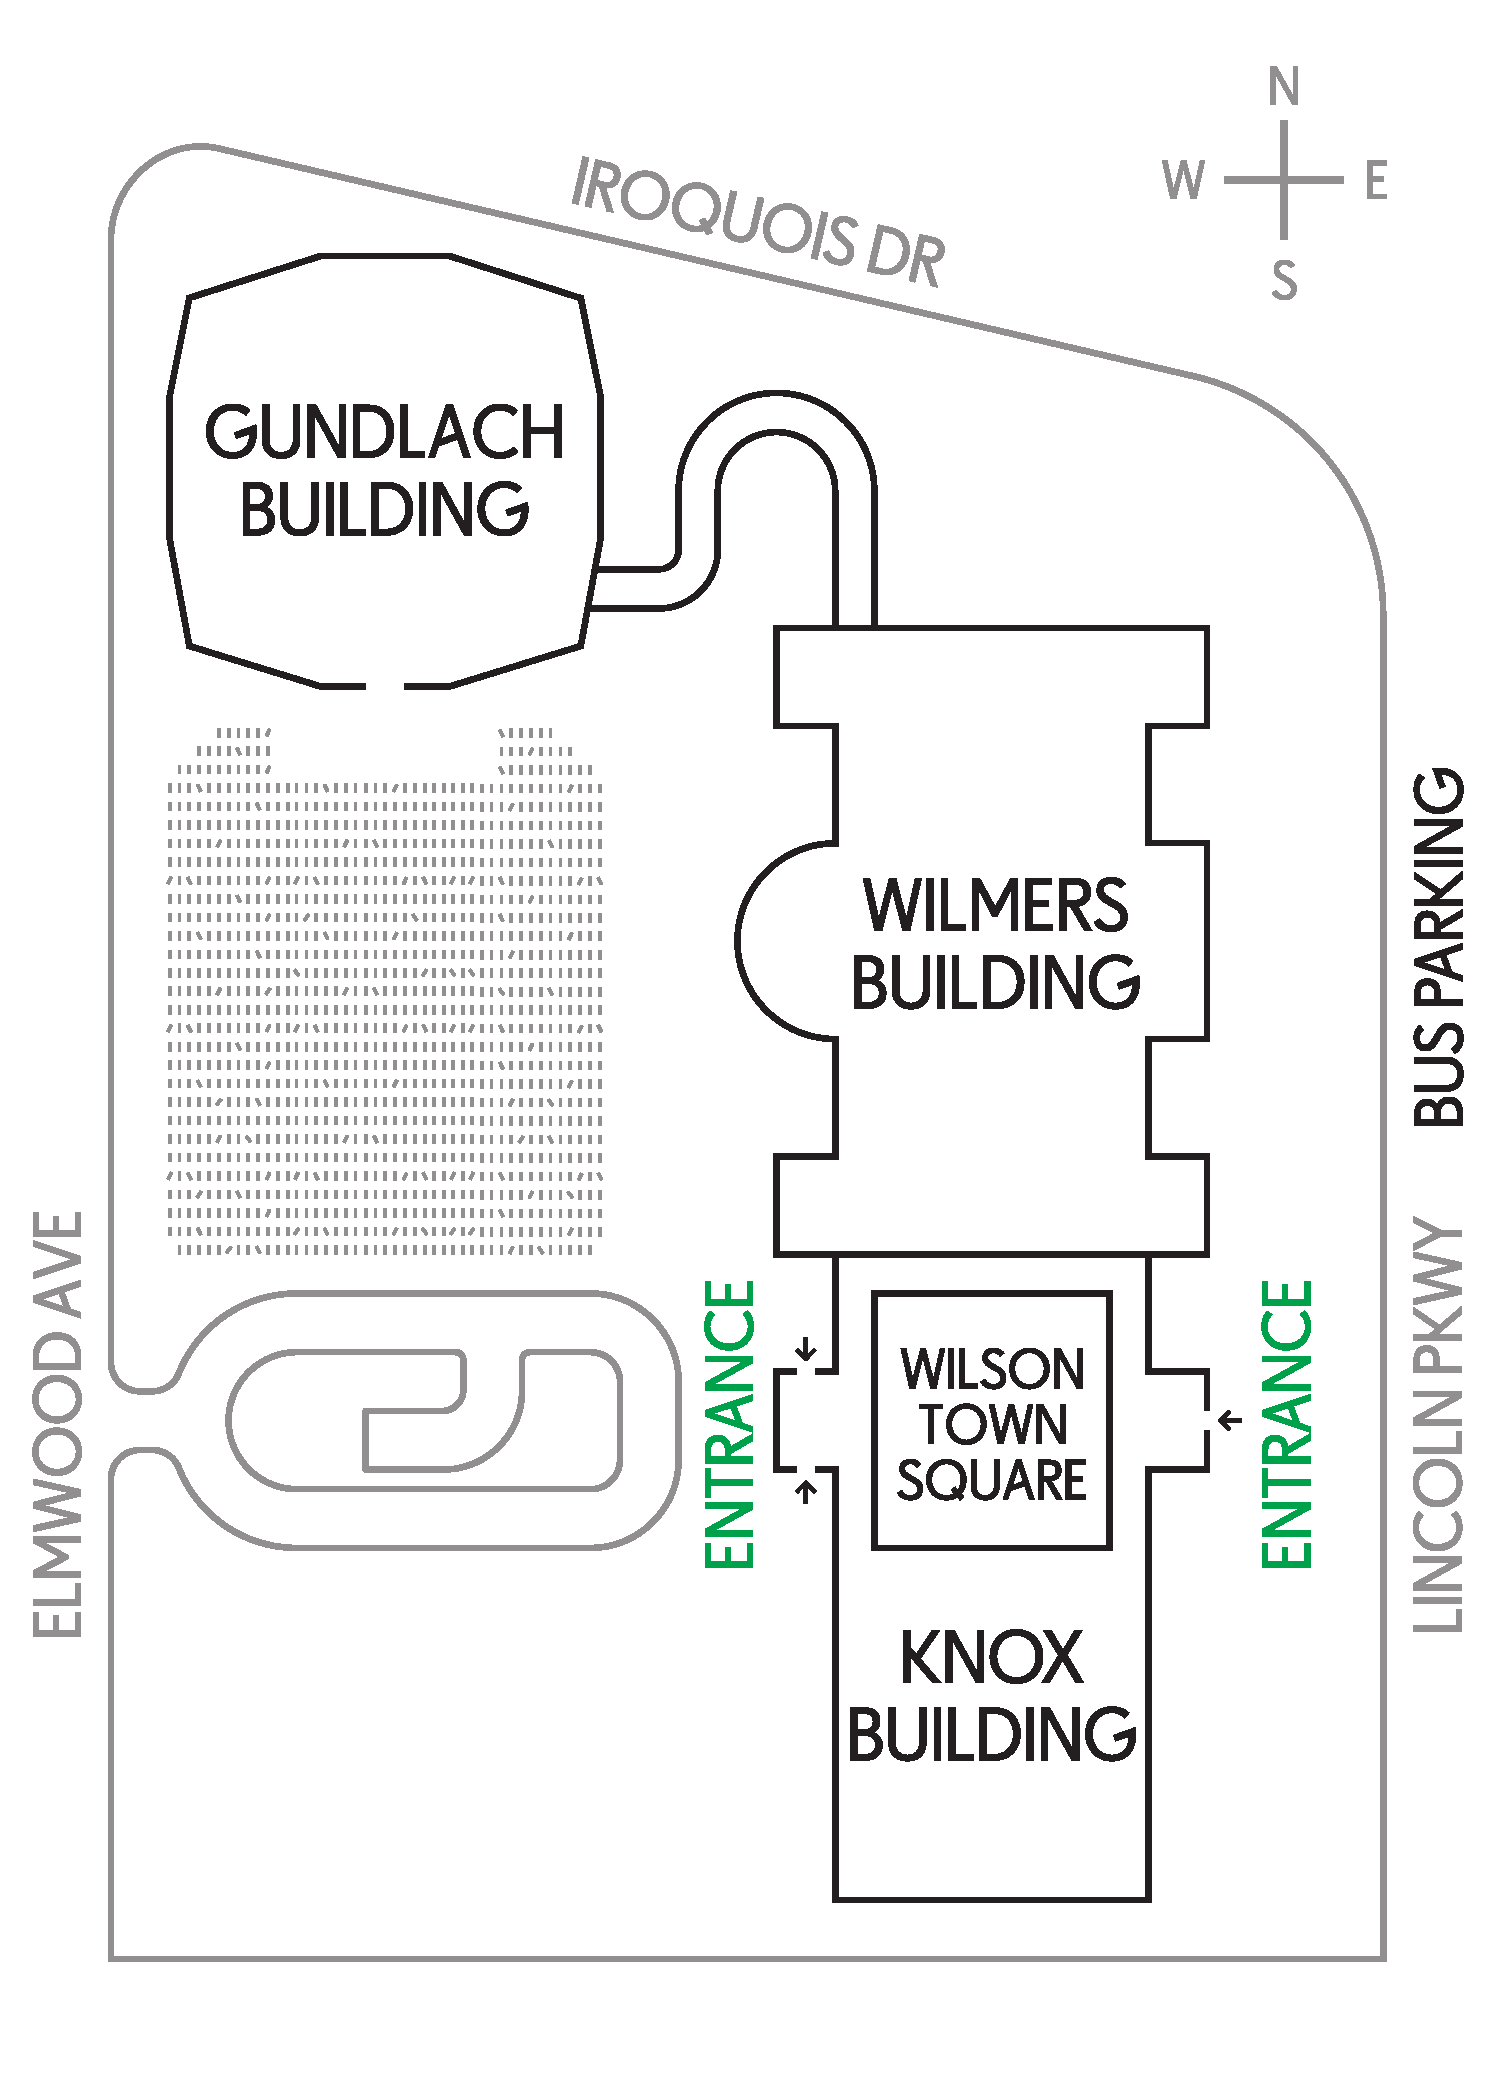 Map of the Buffalo AKG Campus